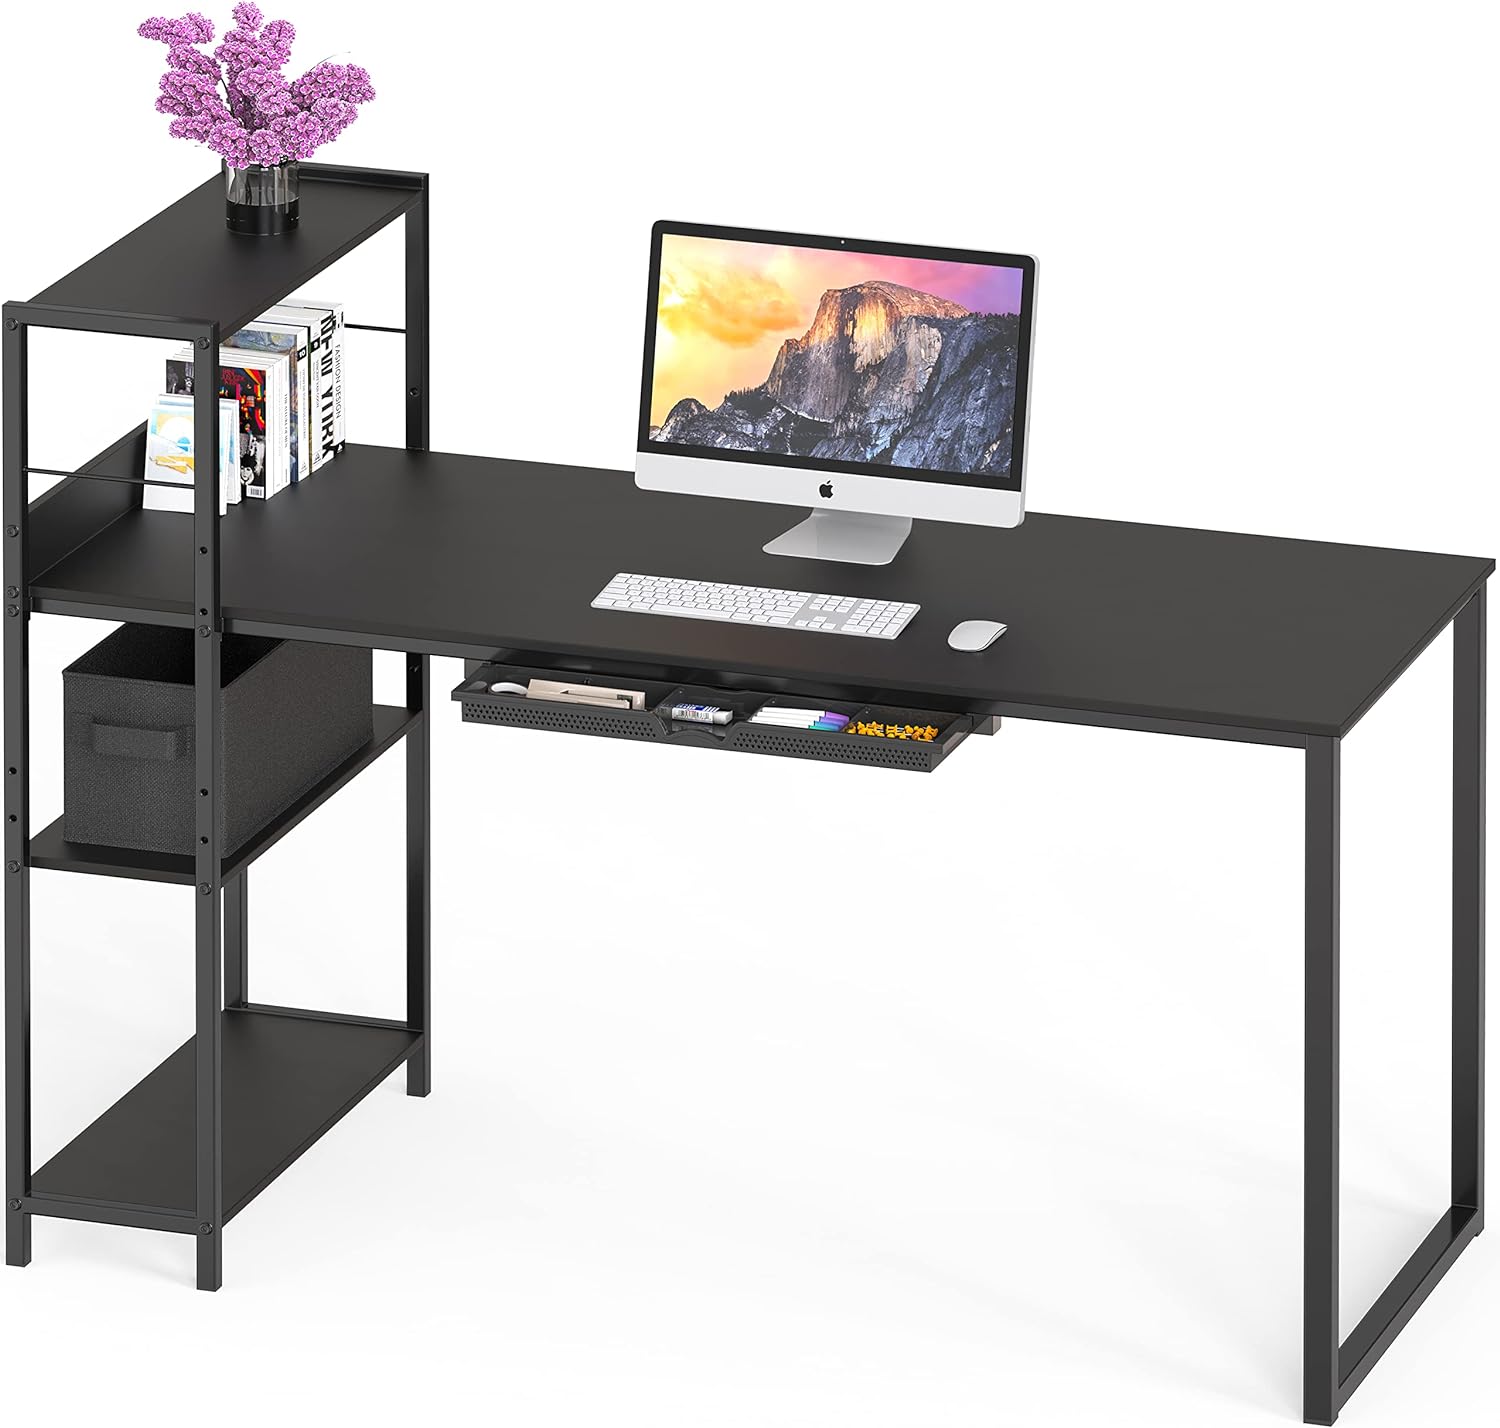 It was easy to put together and I love that it has a lot of space for a small desk.